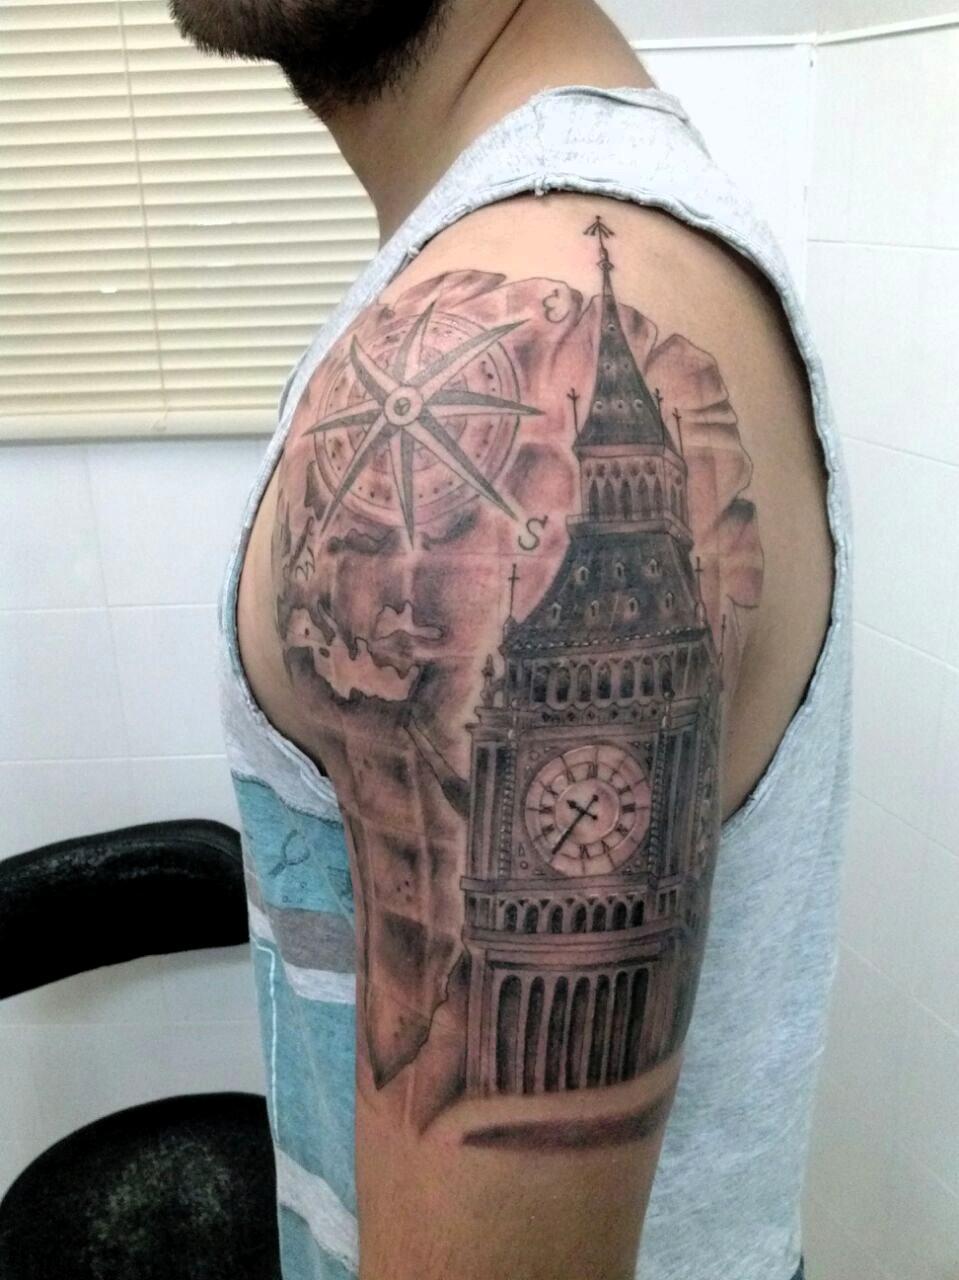 KD Studio Tooting Broadway Tattoo  Body Piercing  Big Ben  Peter pan  Tattoo 9 High street tooting broadway SW17 0SN NEXT TO TKMAX  KDSTUDITOOTINK Done by carlos Northern line